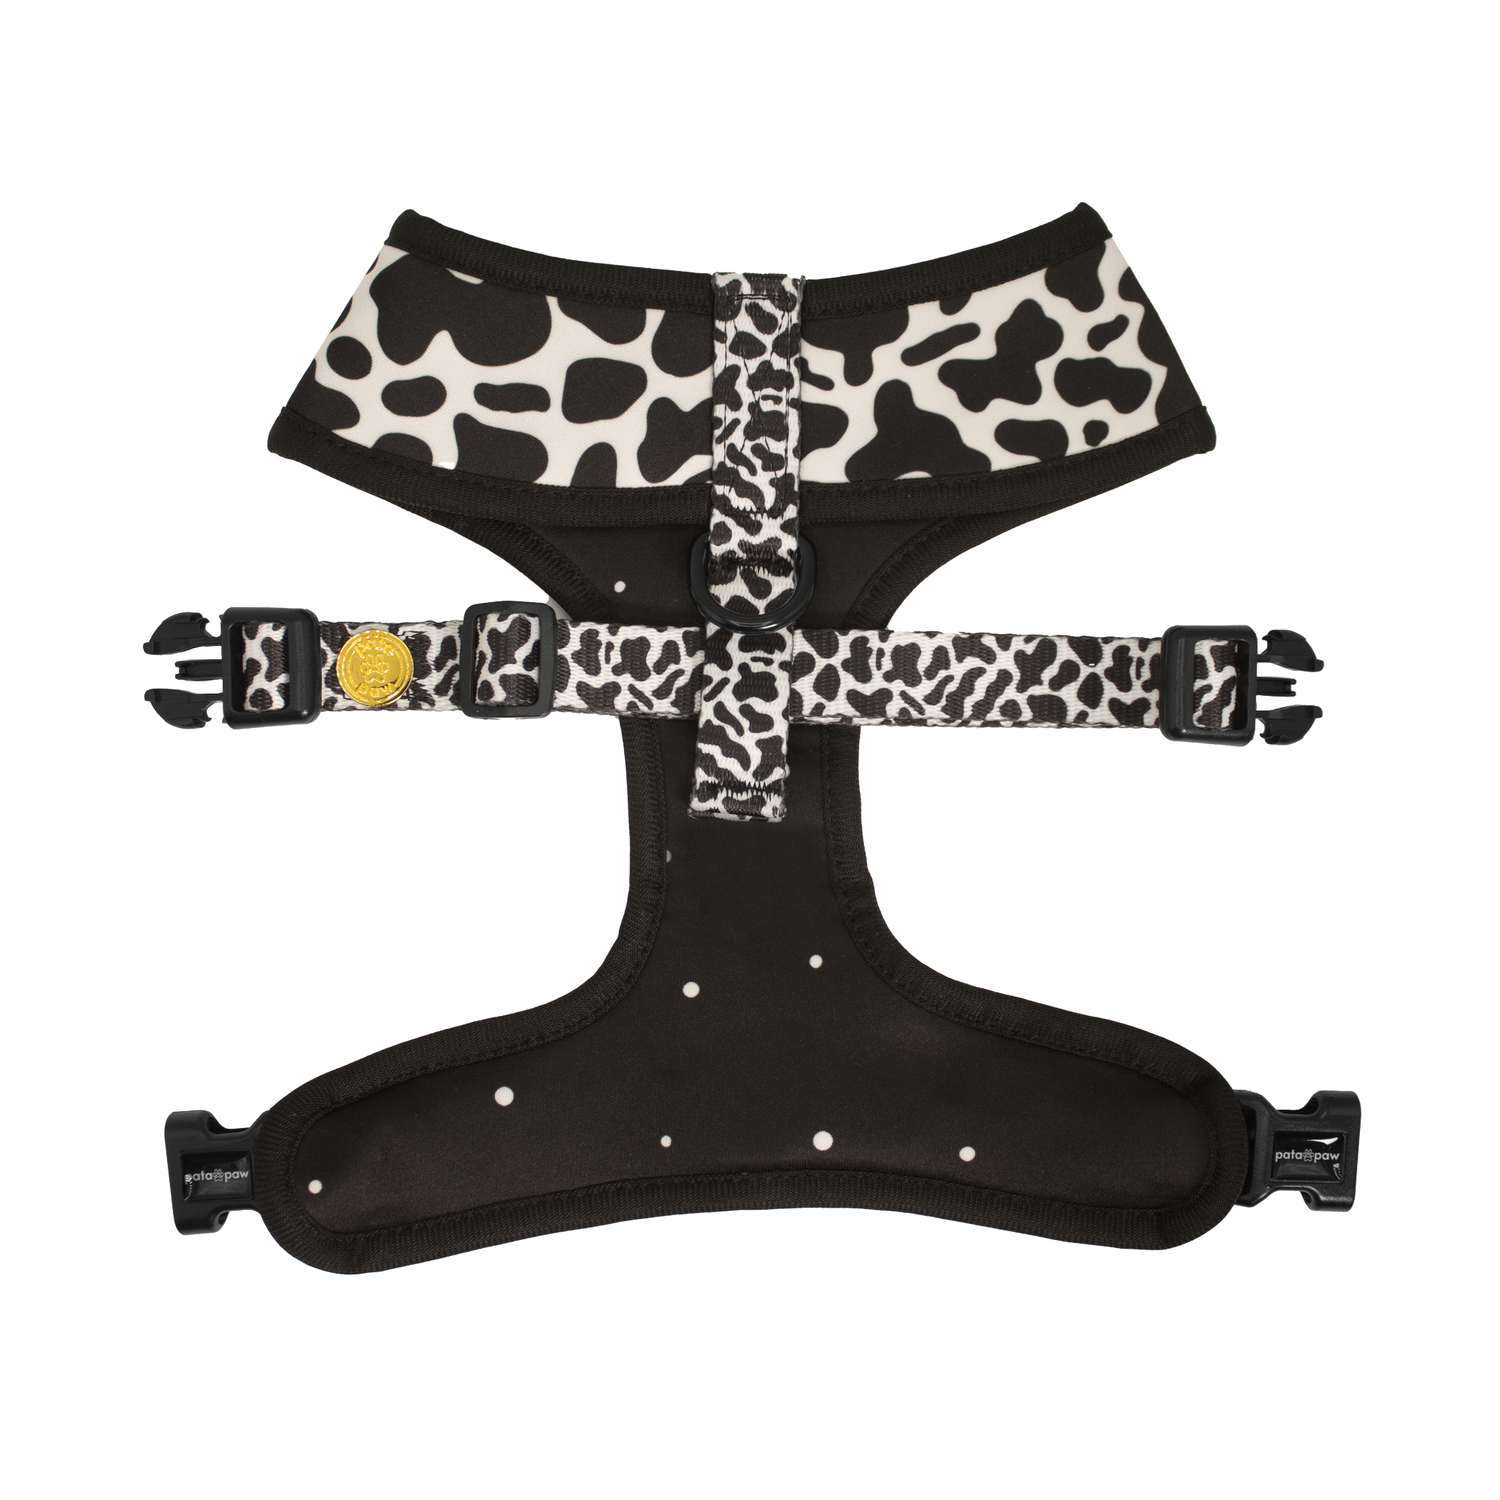 Pata Paw moo reversible harness showing its backside.